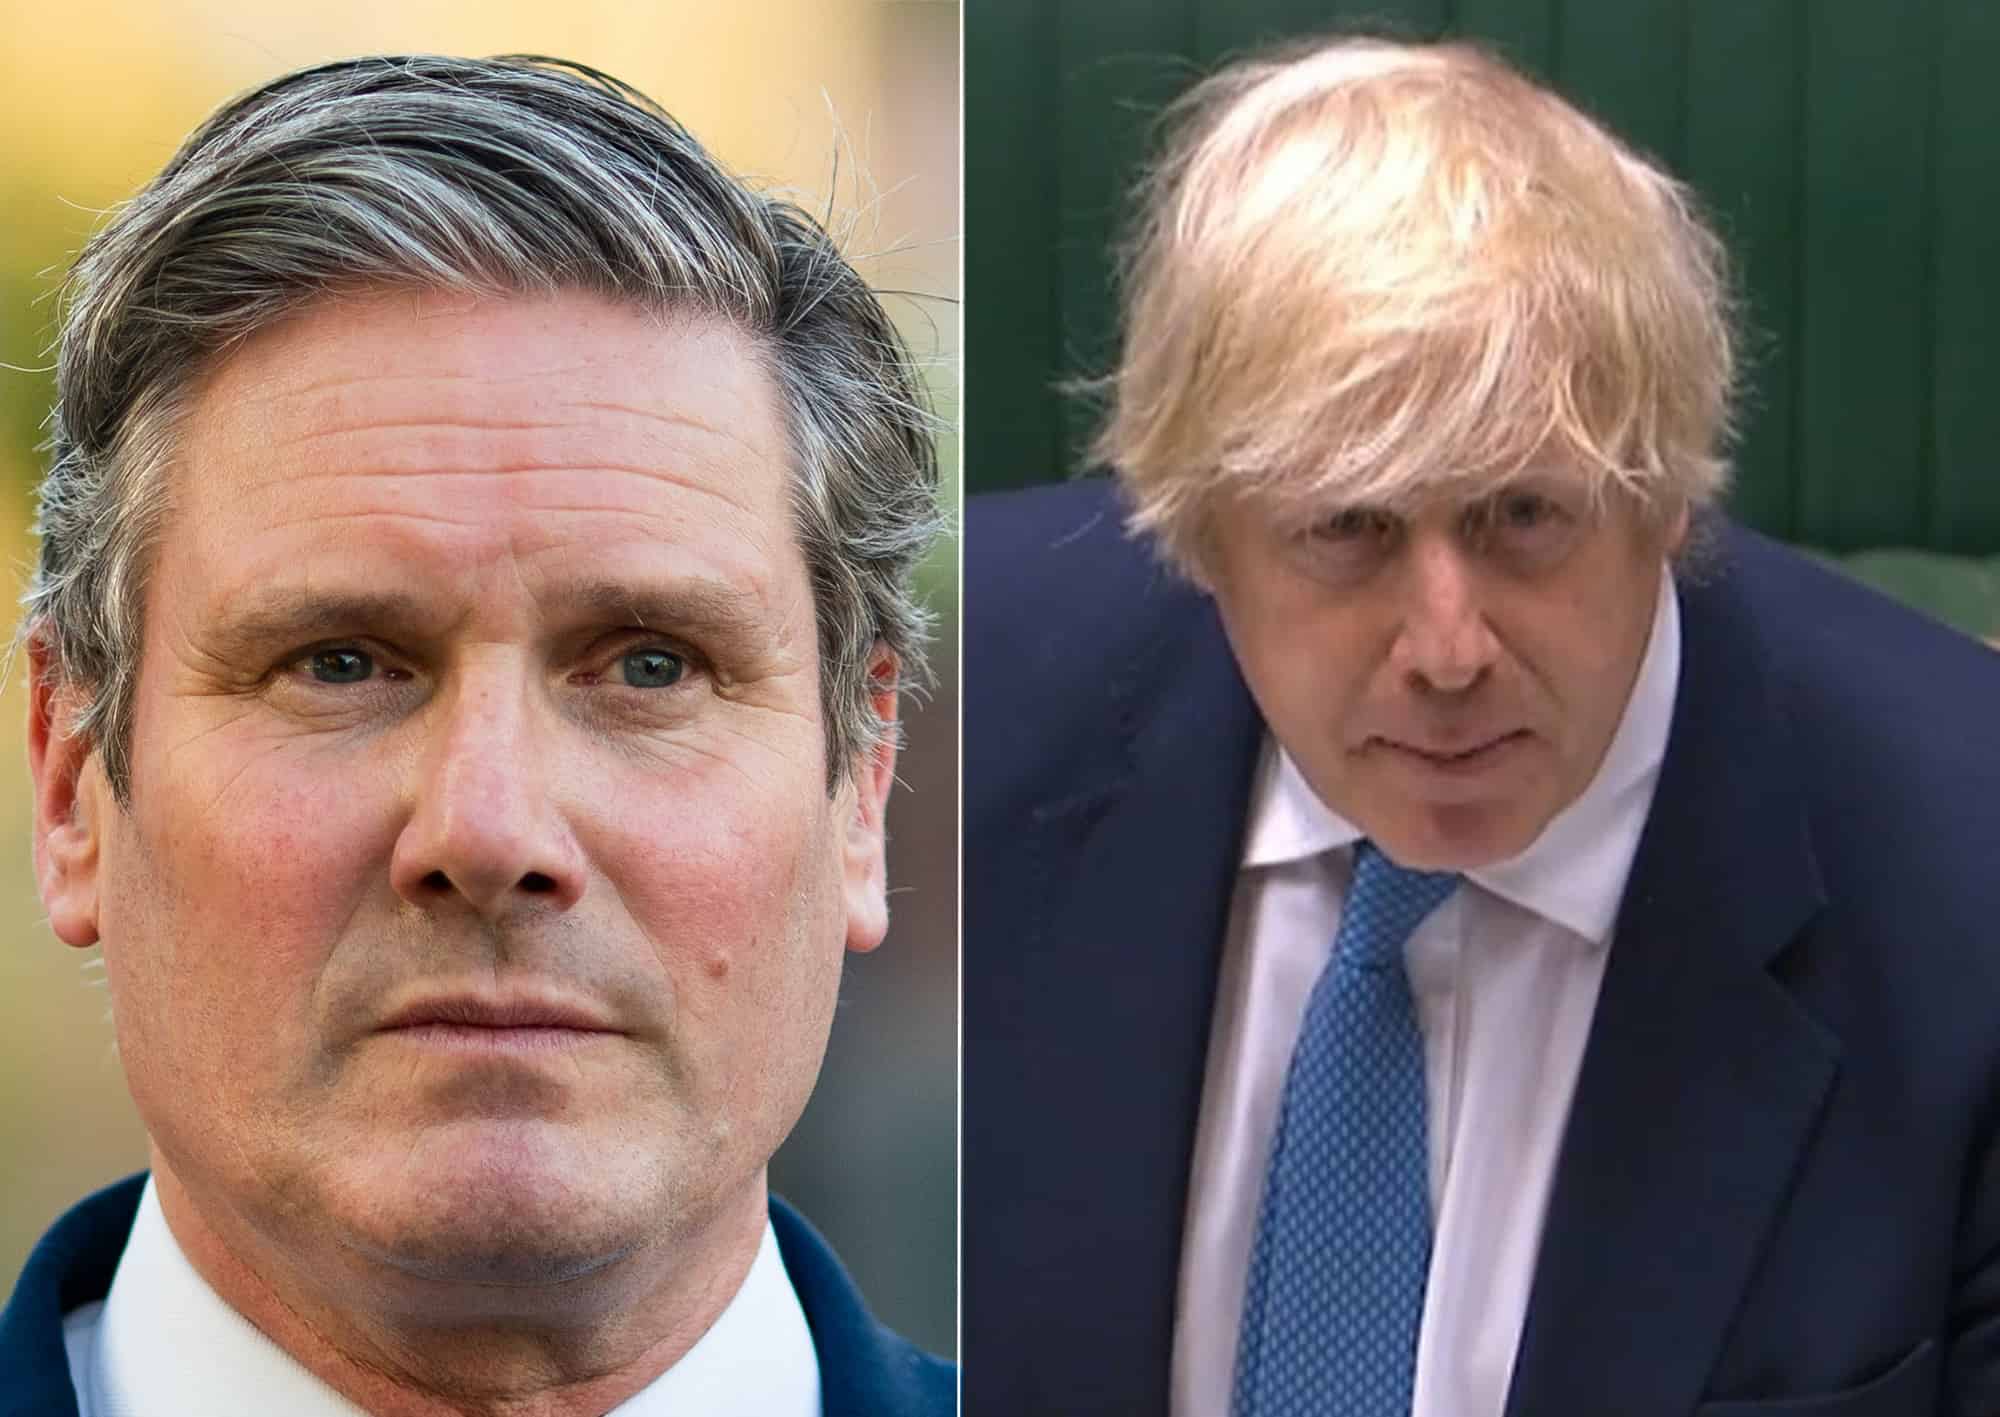 Starmer overtakes Johnson as public’s choice for PM